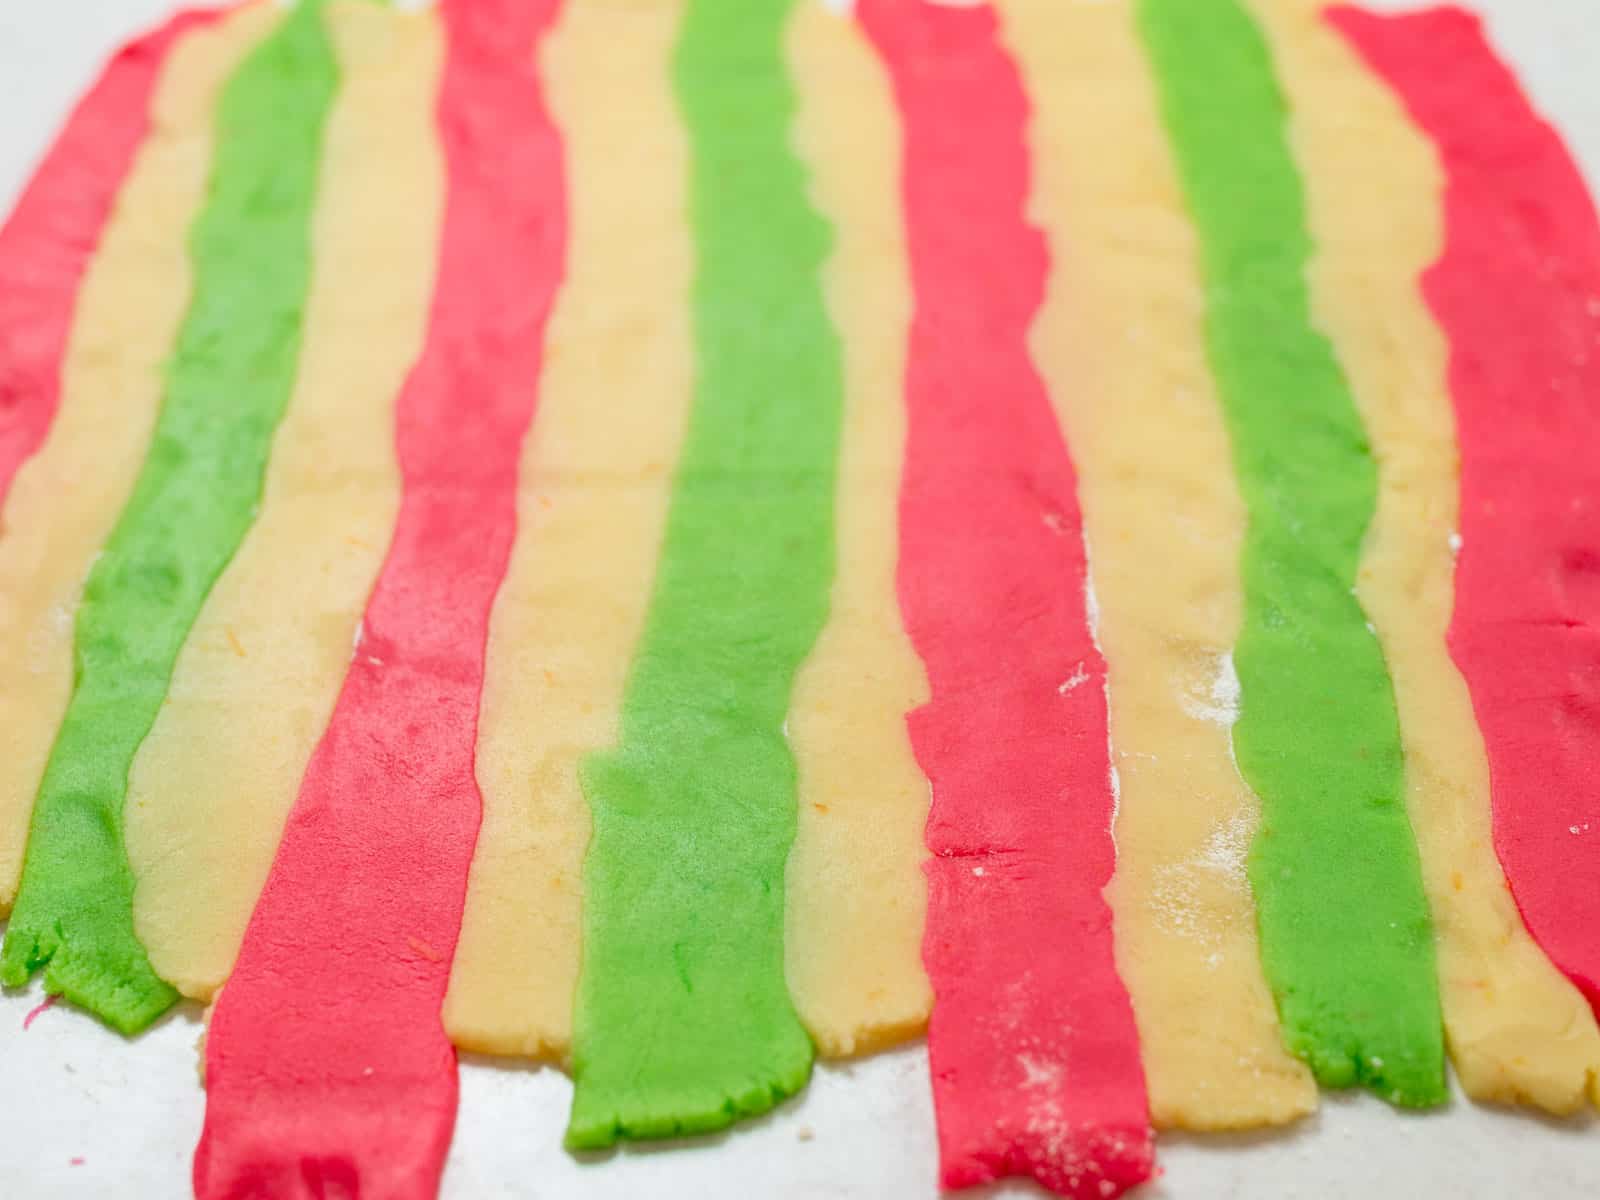 Roll out the rainbow hamantaschen dough to ¼ inch thickness.